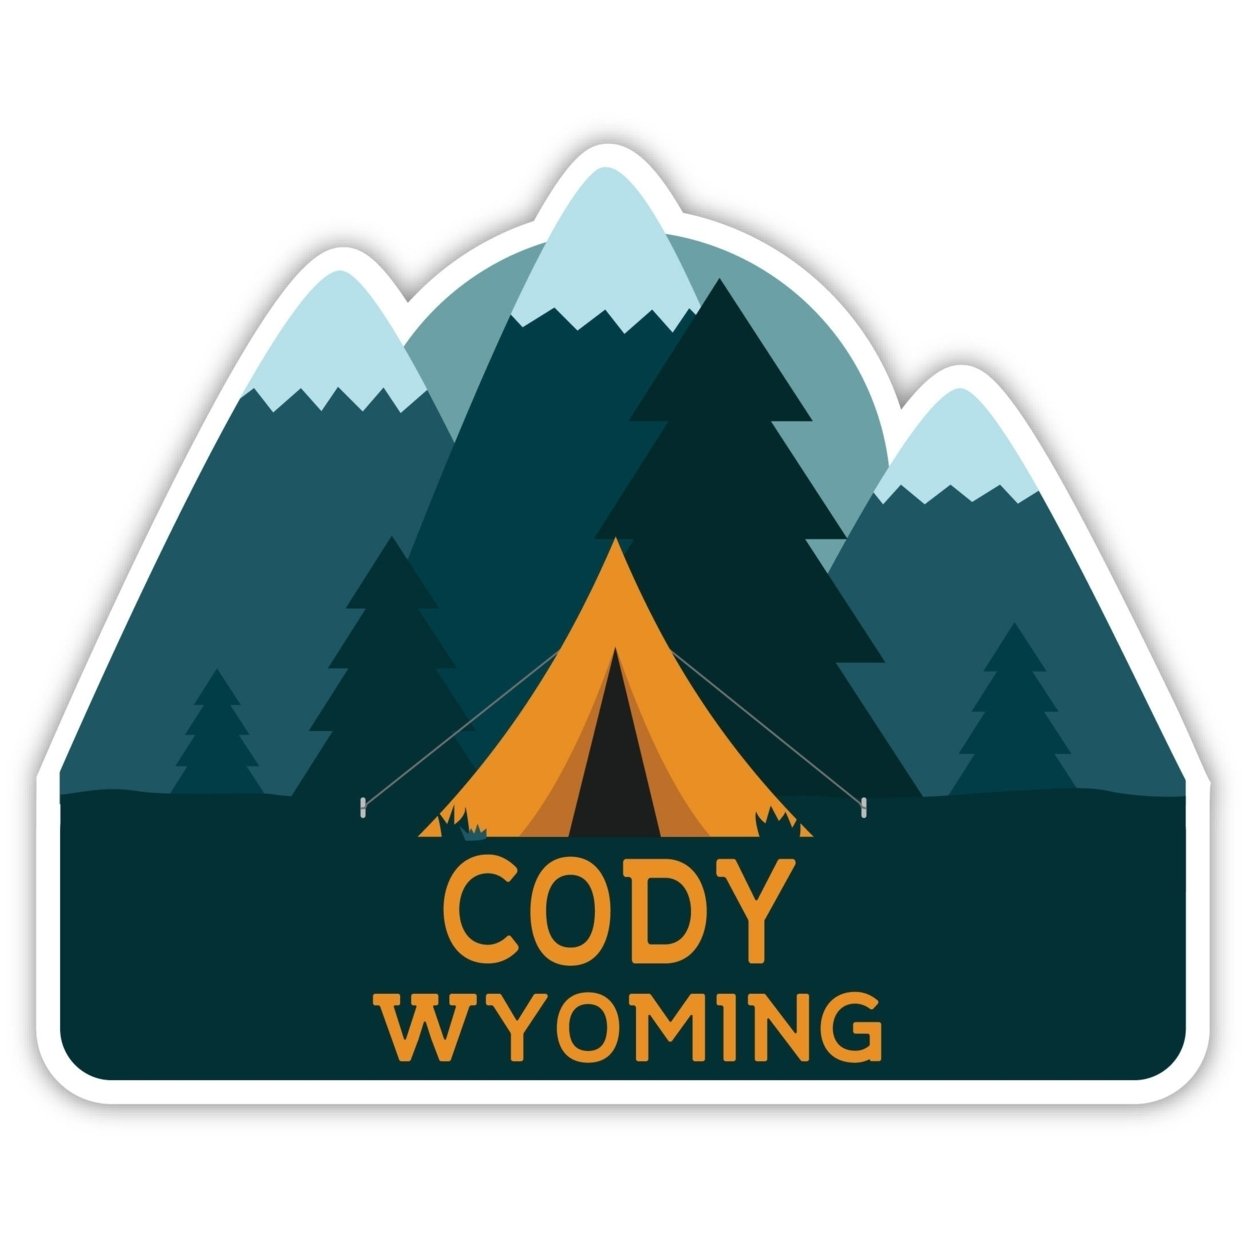 Cody Wyoming Souvenir Decorative Stickers (Choose Theme And Size) - Single Unit, 10-Inch, Camp Life